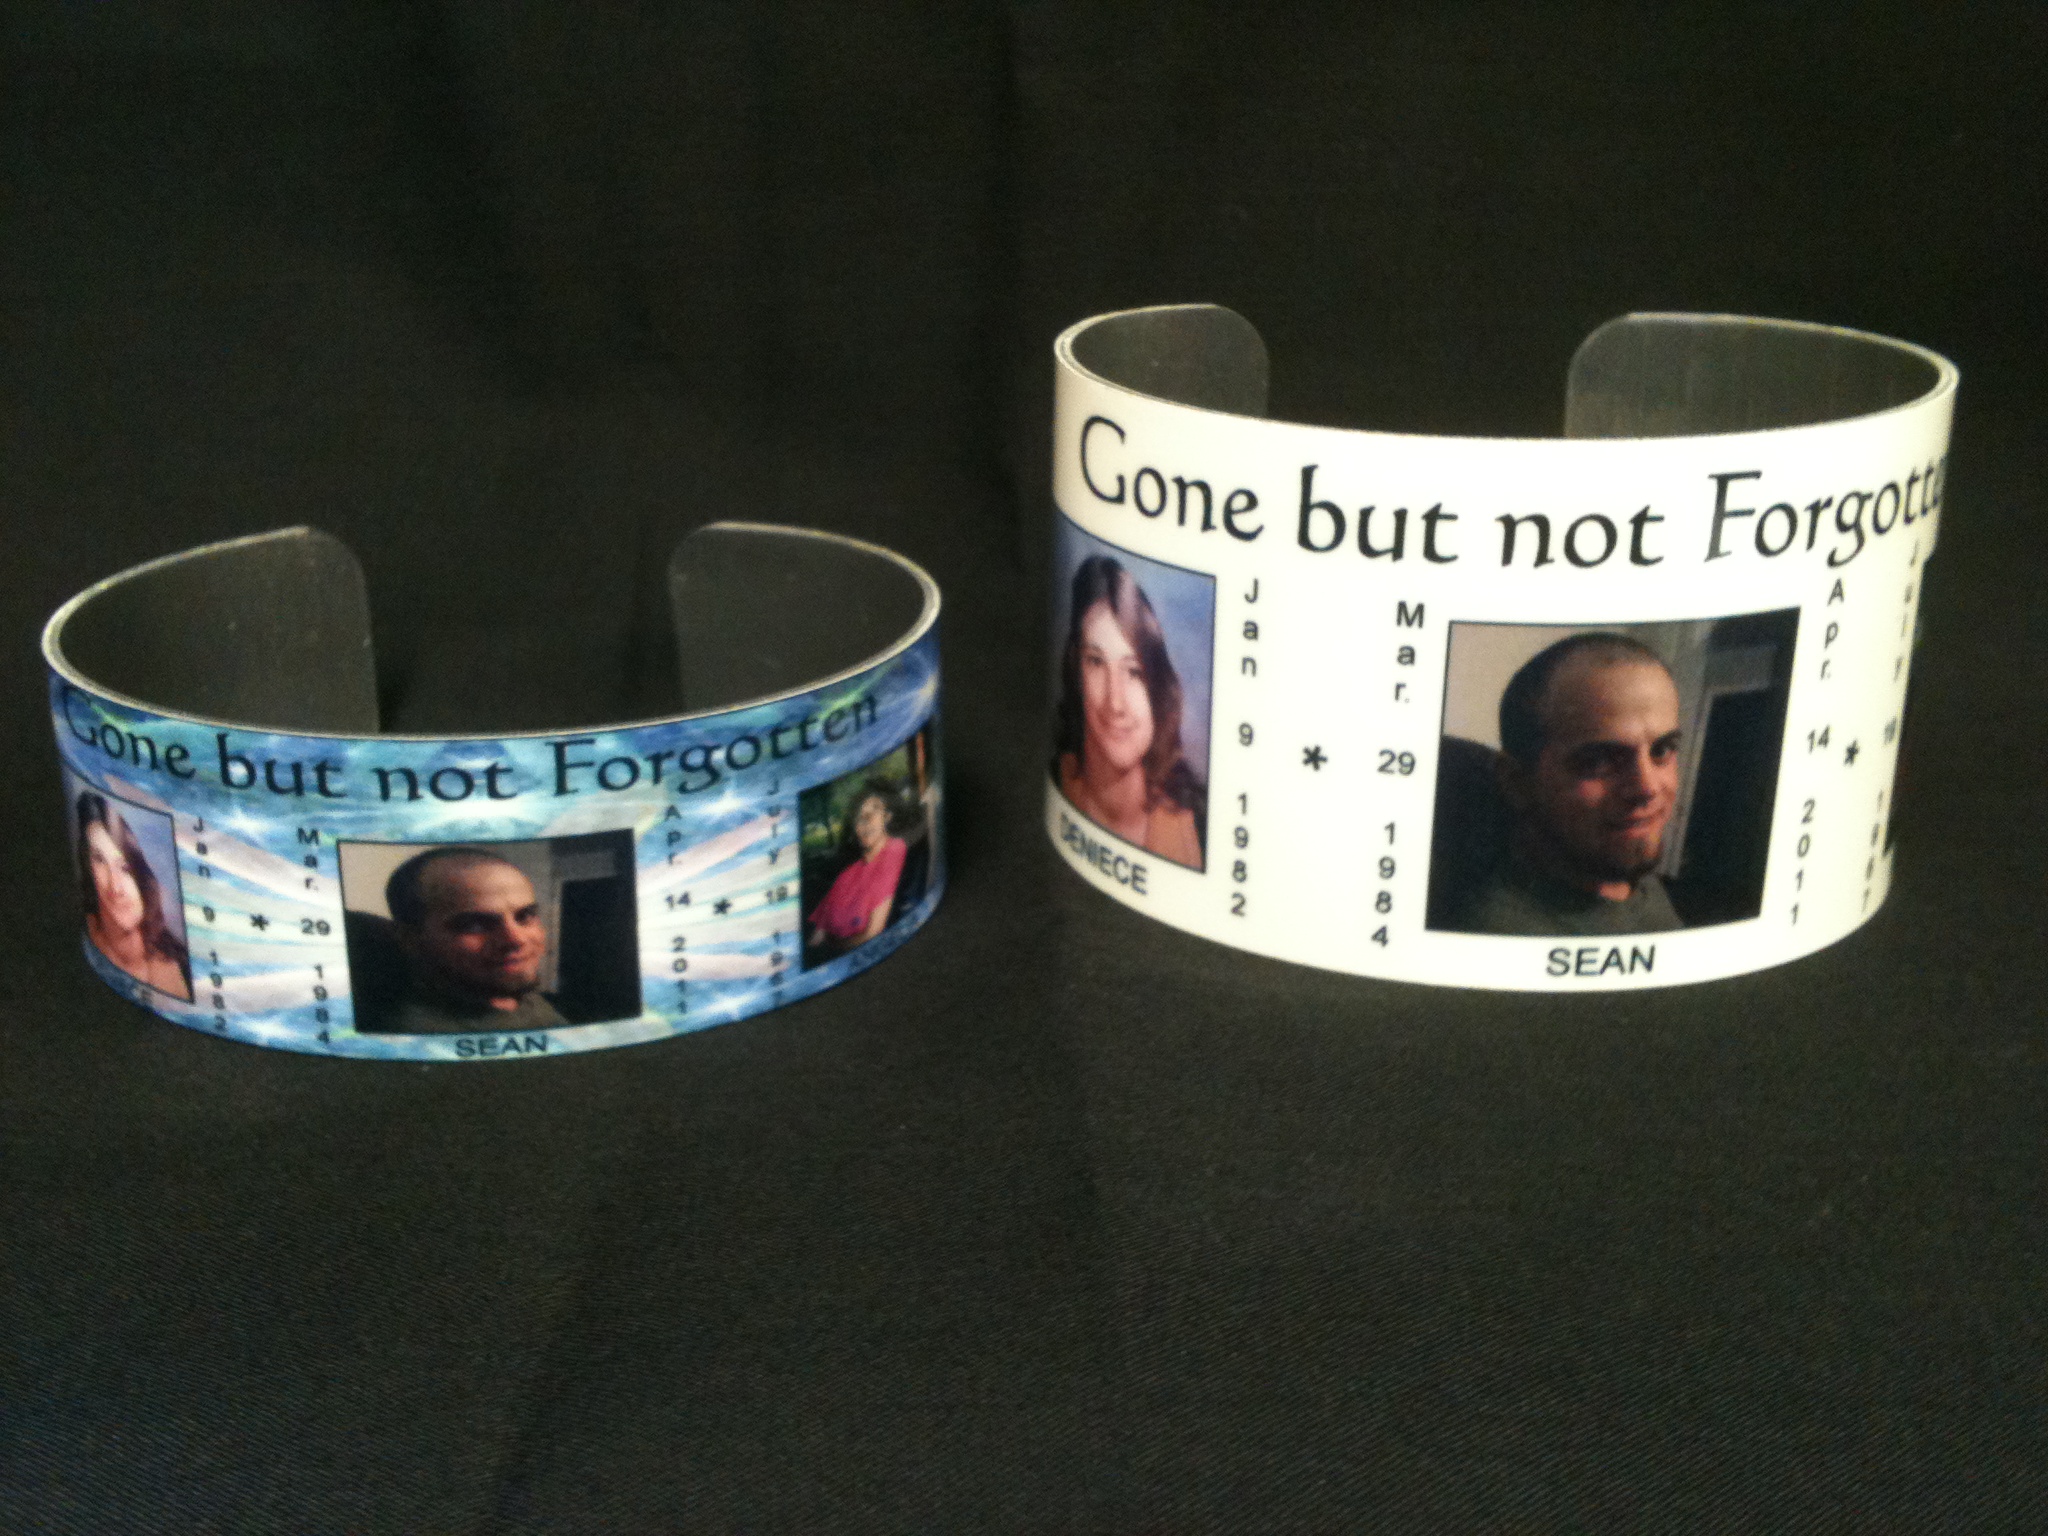 Memorial Cuff Bracelets made with sublimation printing